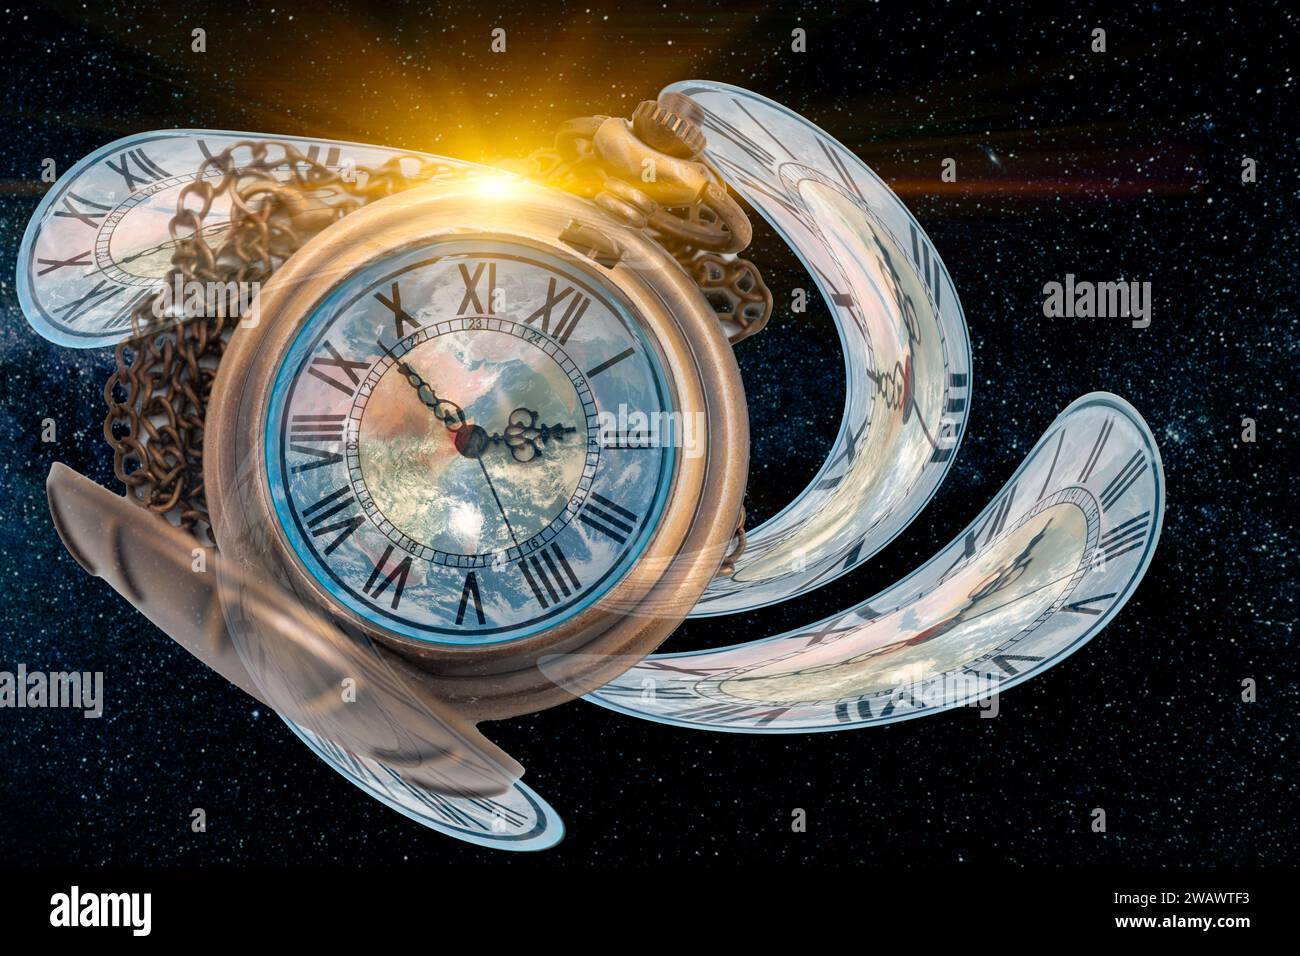 Spacetime universe Scifi concept, Twist clock time distortion warp into space bended curved for Space and Times of Theory, image element from NASA Stock Photo